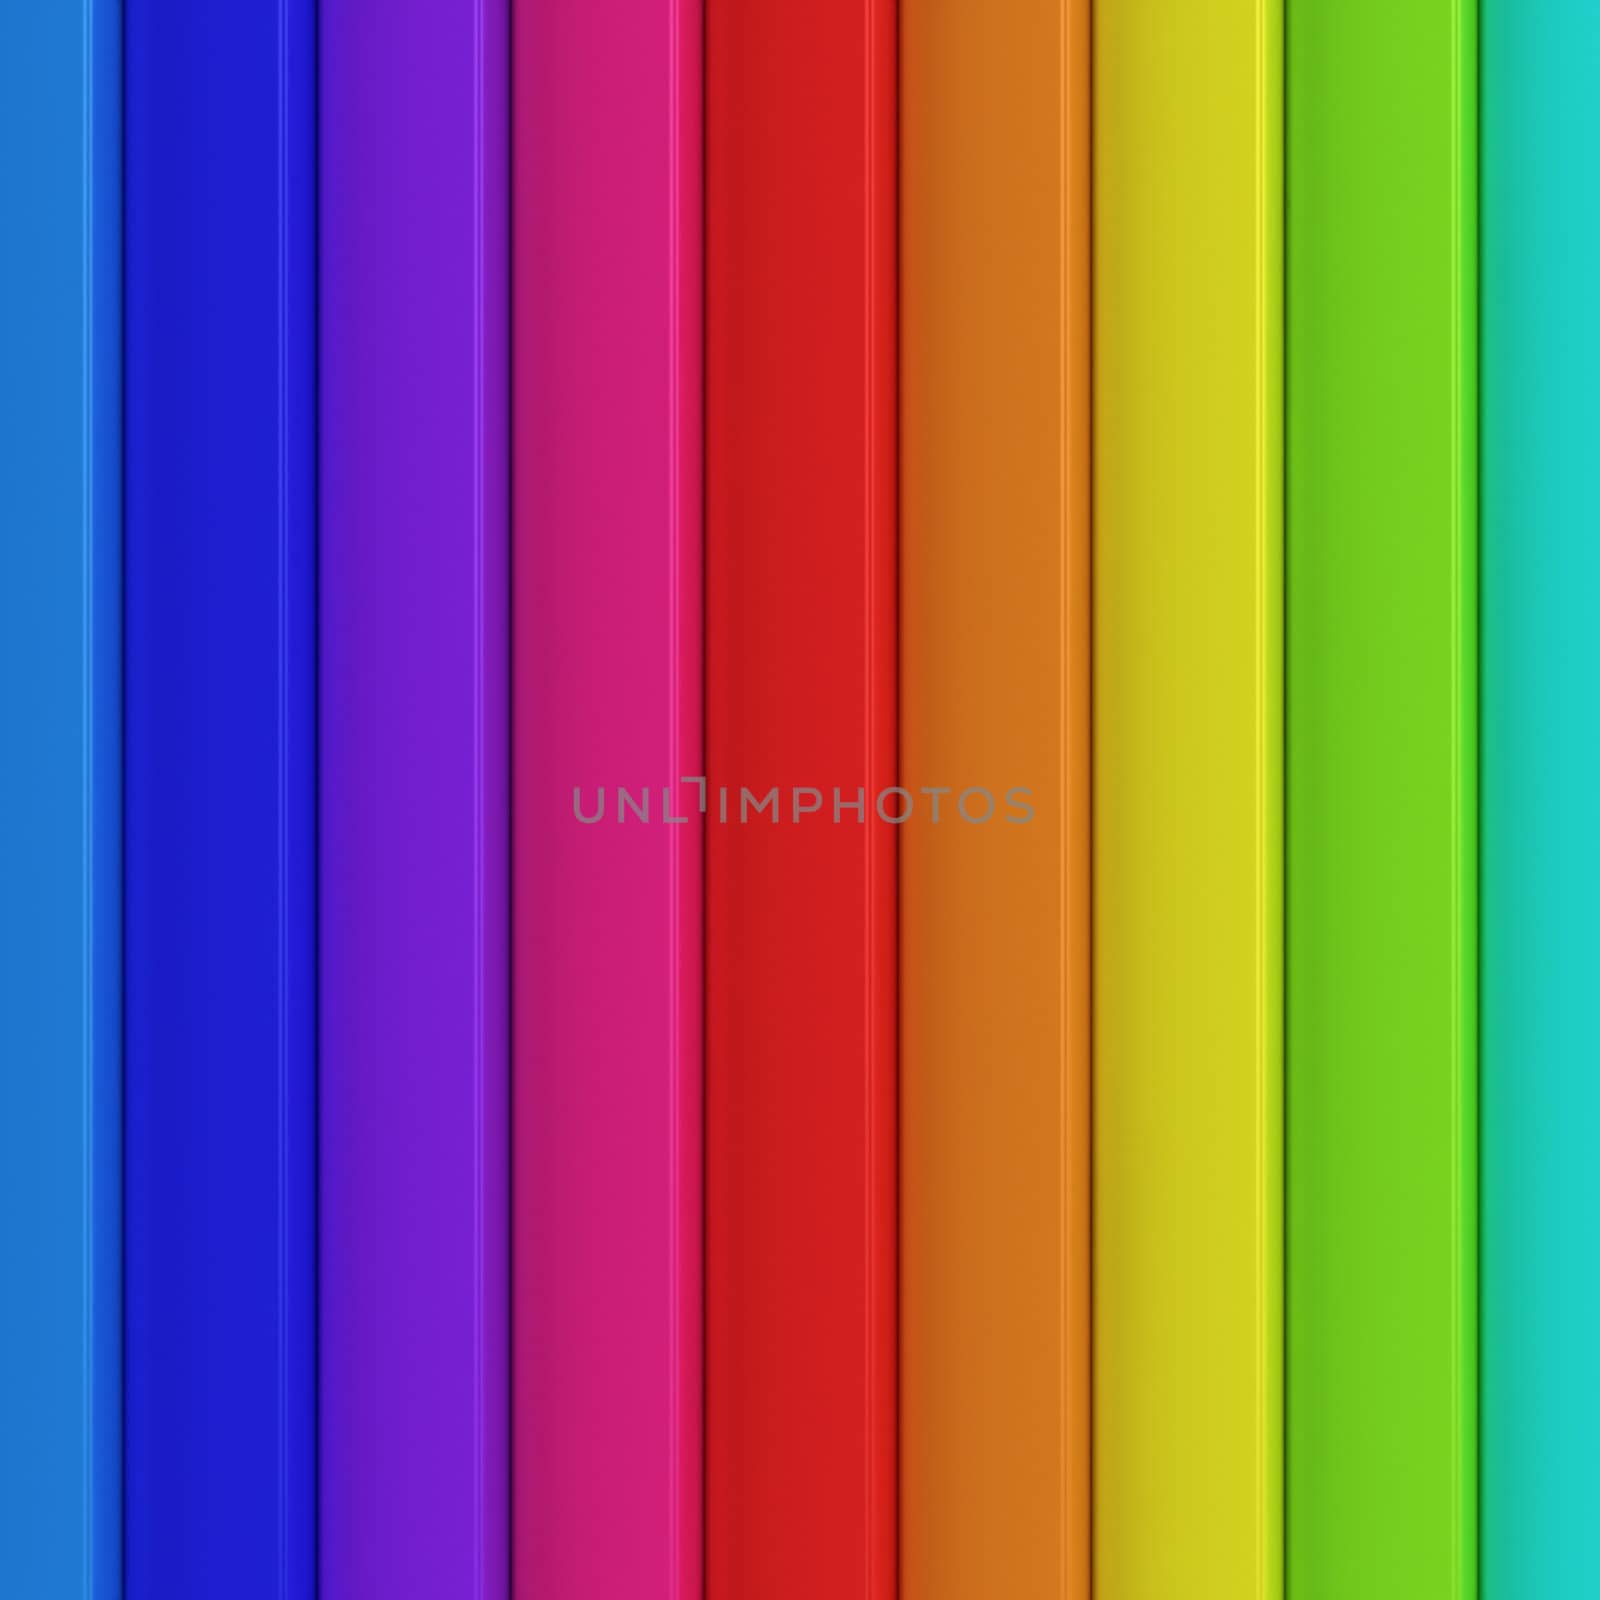 Striped background of rainbow colors